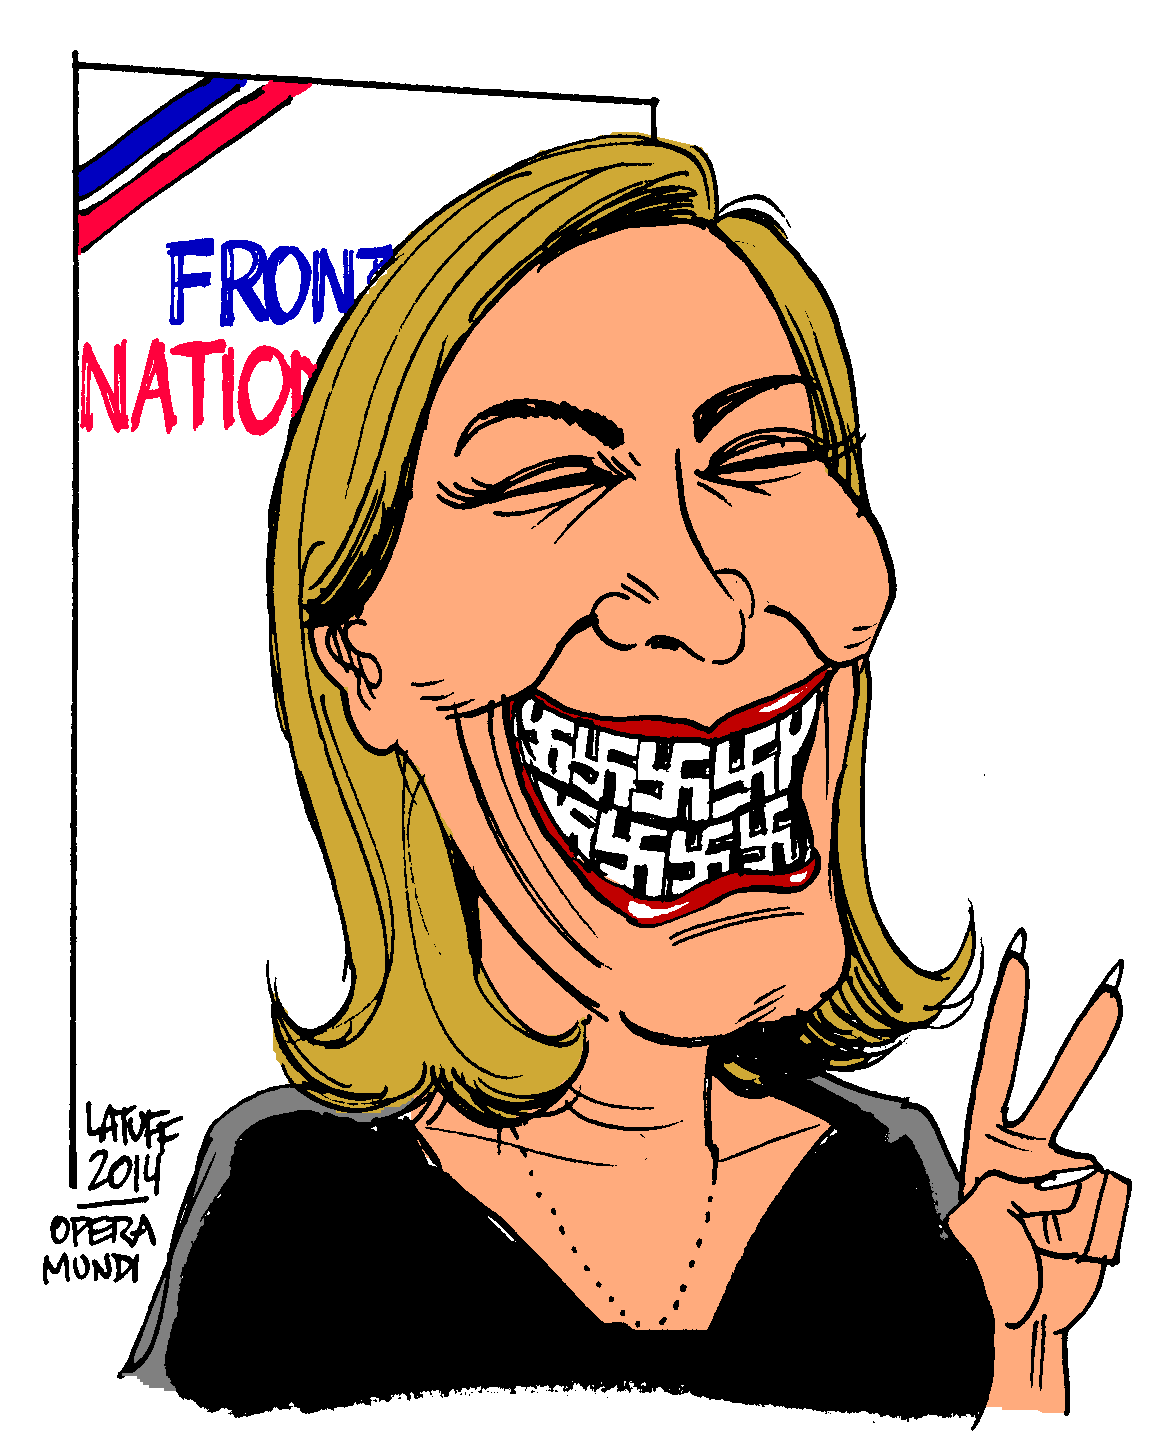 far-right-marine-le-pen-wins-european-parliament-elections-in-france.gif